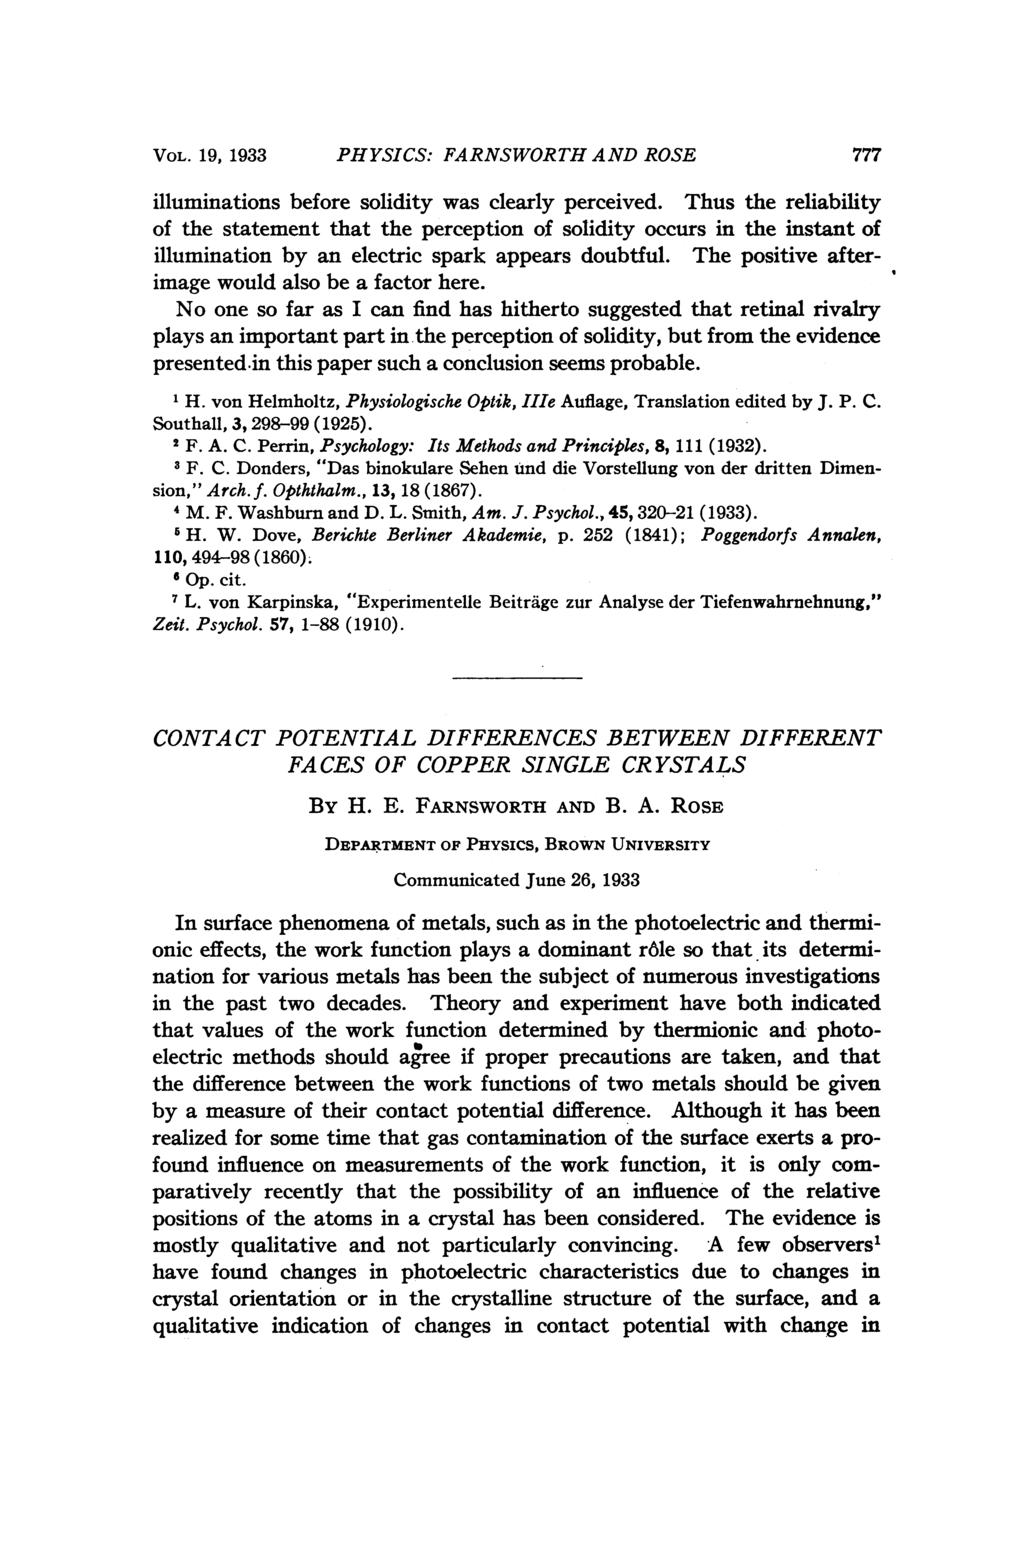 VOL. 19, 1933 PHYSICS: FARNSWORTH AND ROSE 777 illuminations before solidity was clearly perceived.